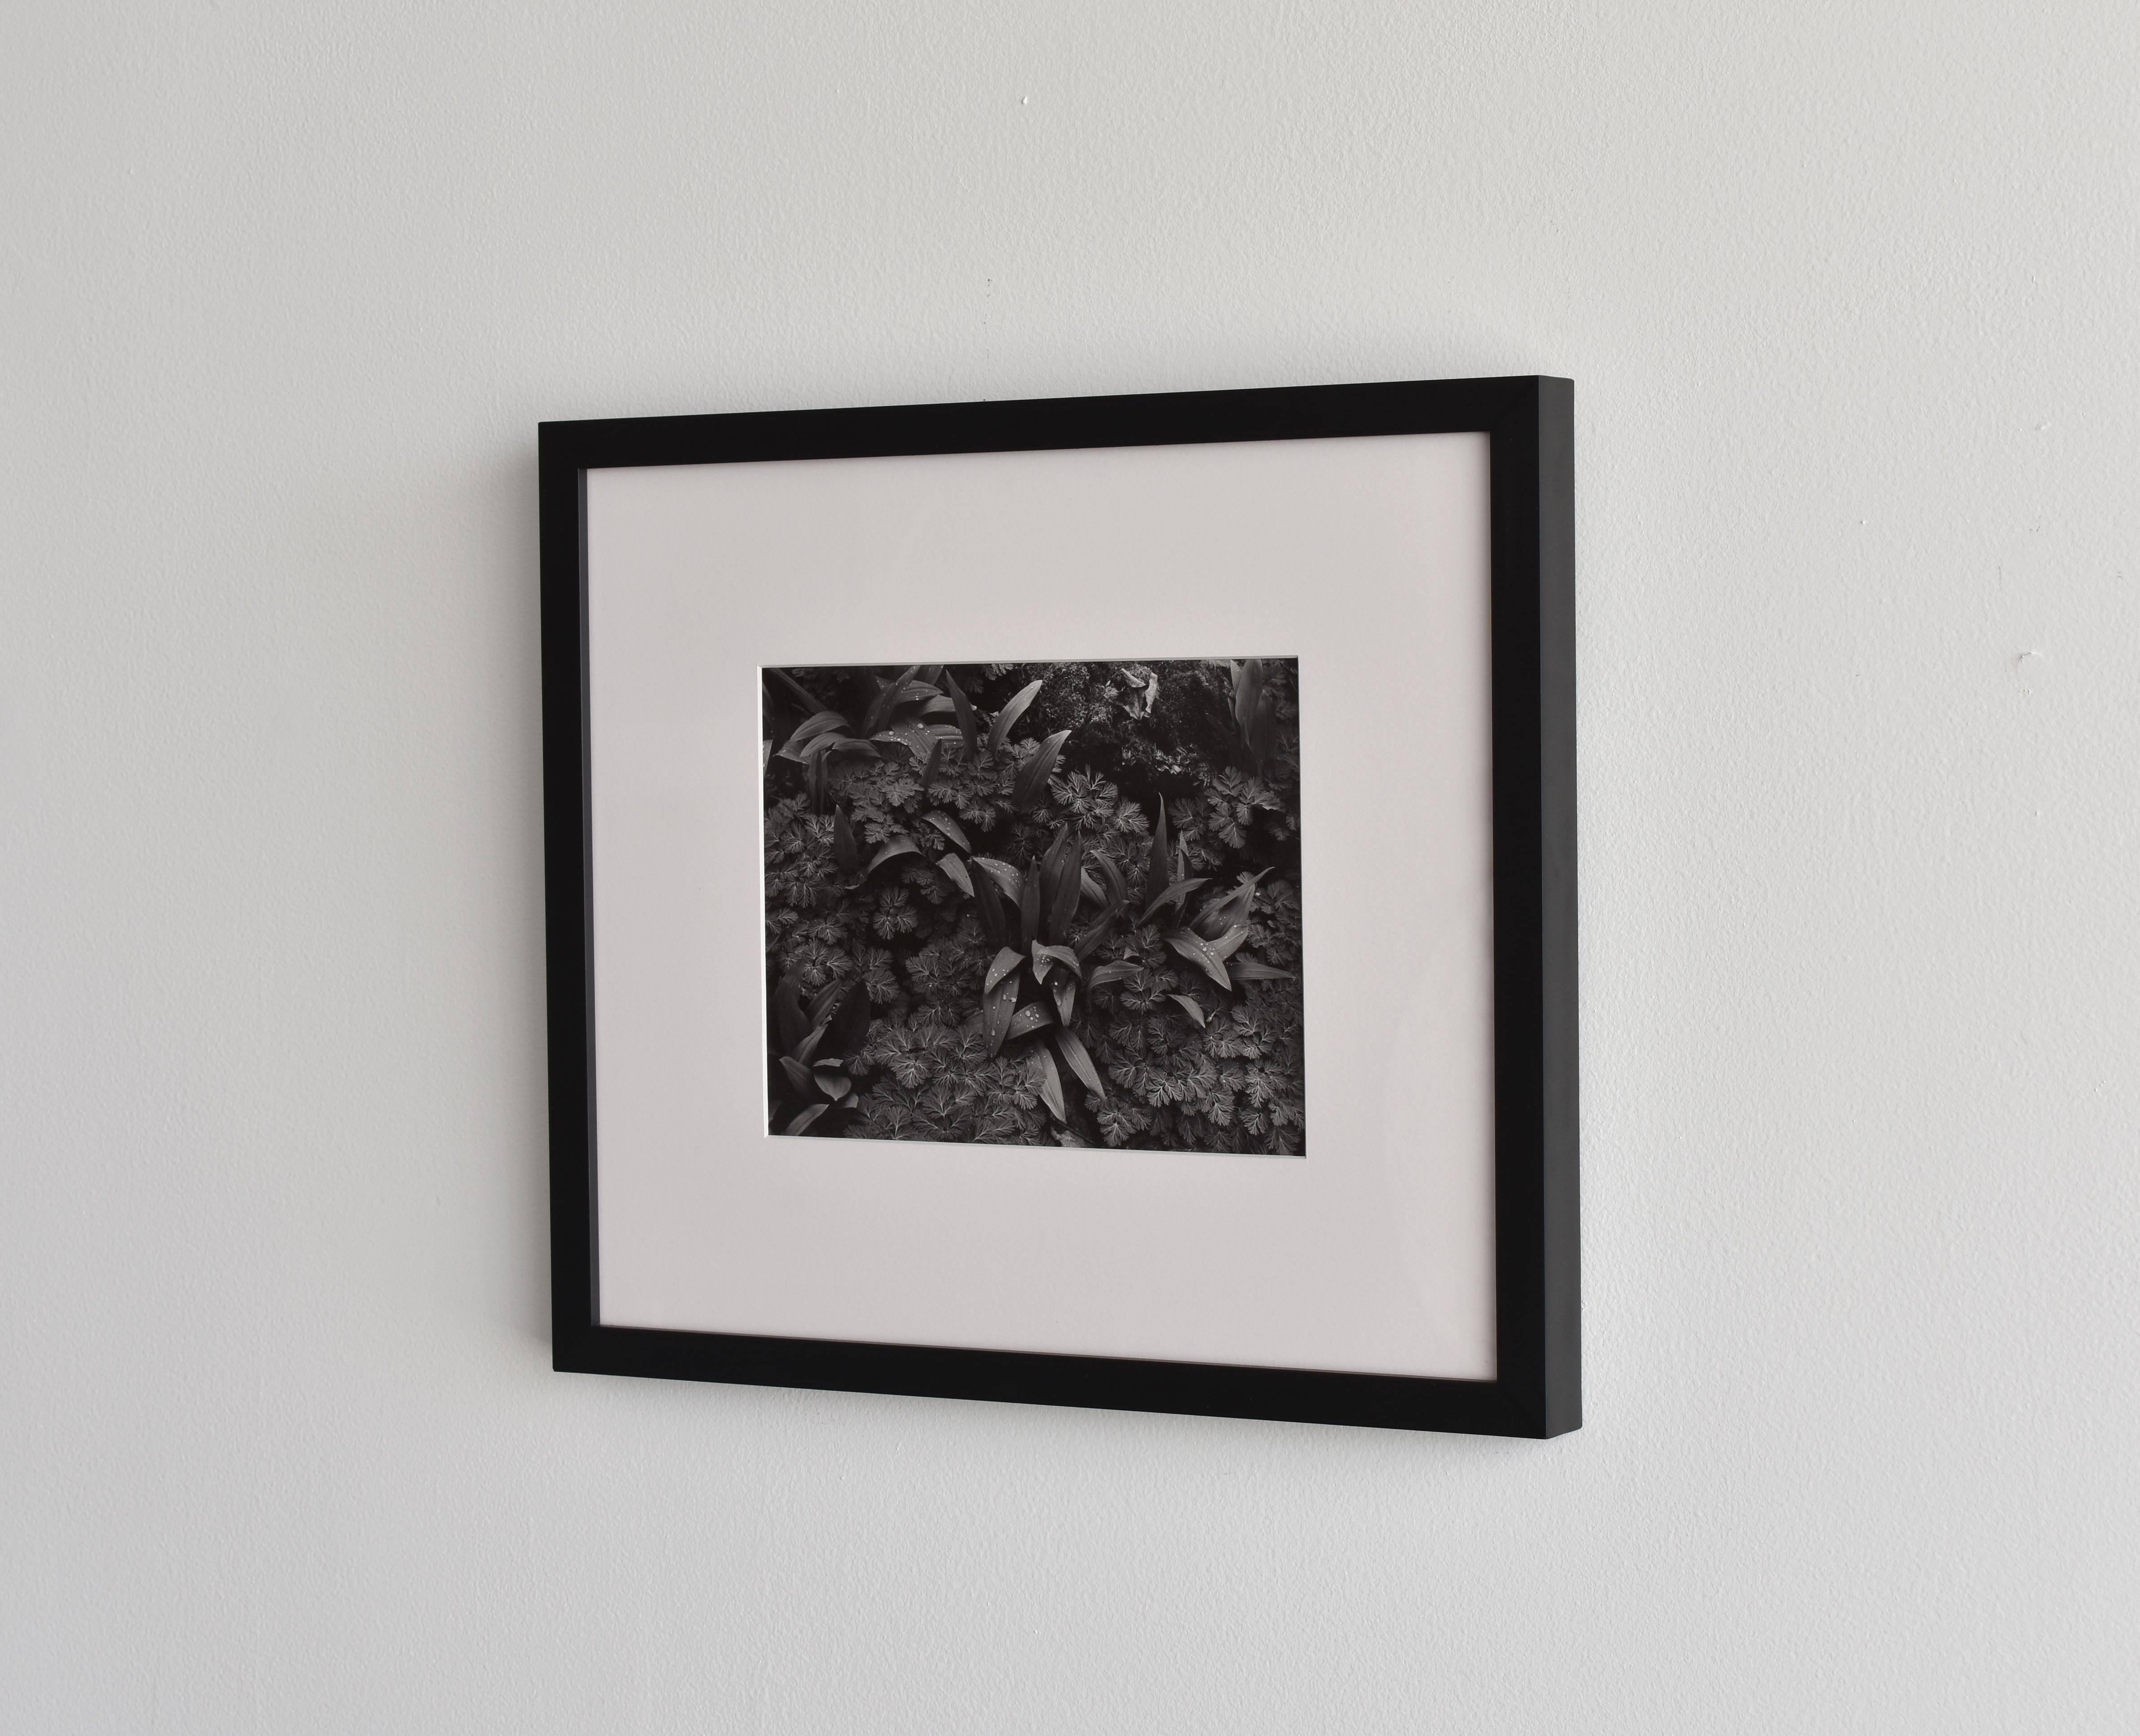 An early original silver gelatin print by John Szarkowski. Black and white landscape photo of plants / leaves. 

John Szarkowski is considered one of the most important individuals in 20th-century photography, largely credited with establishing